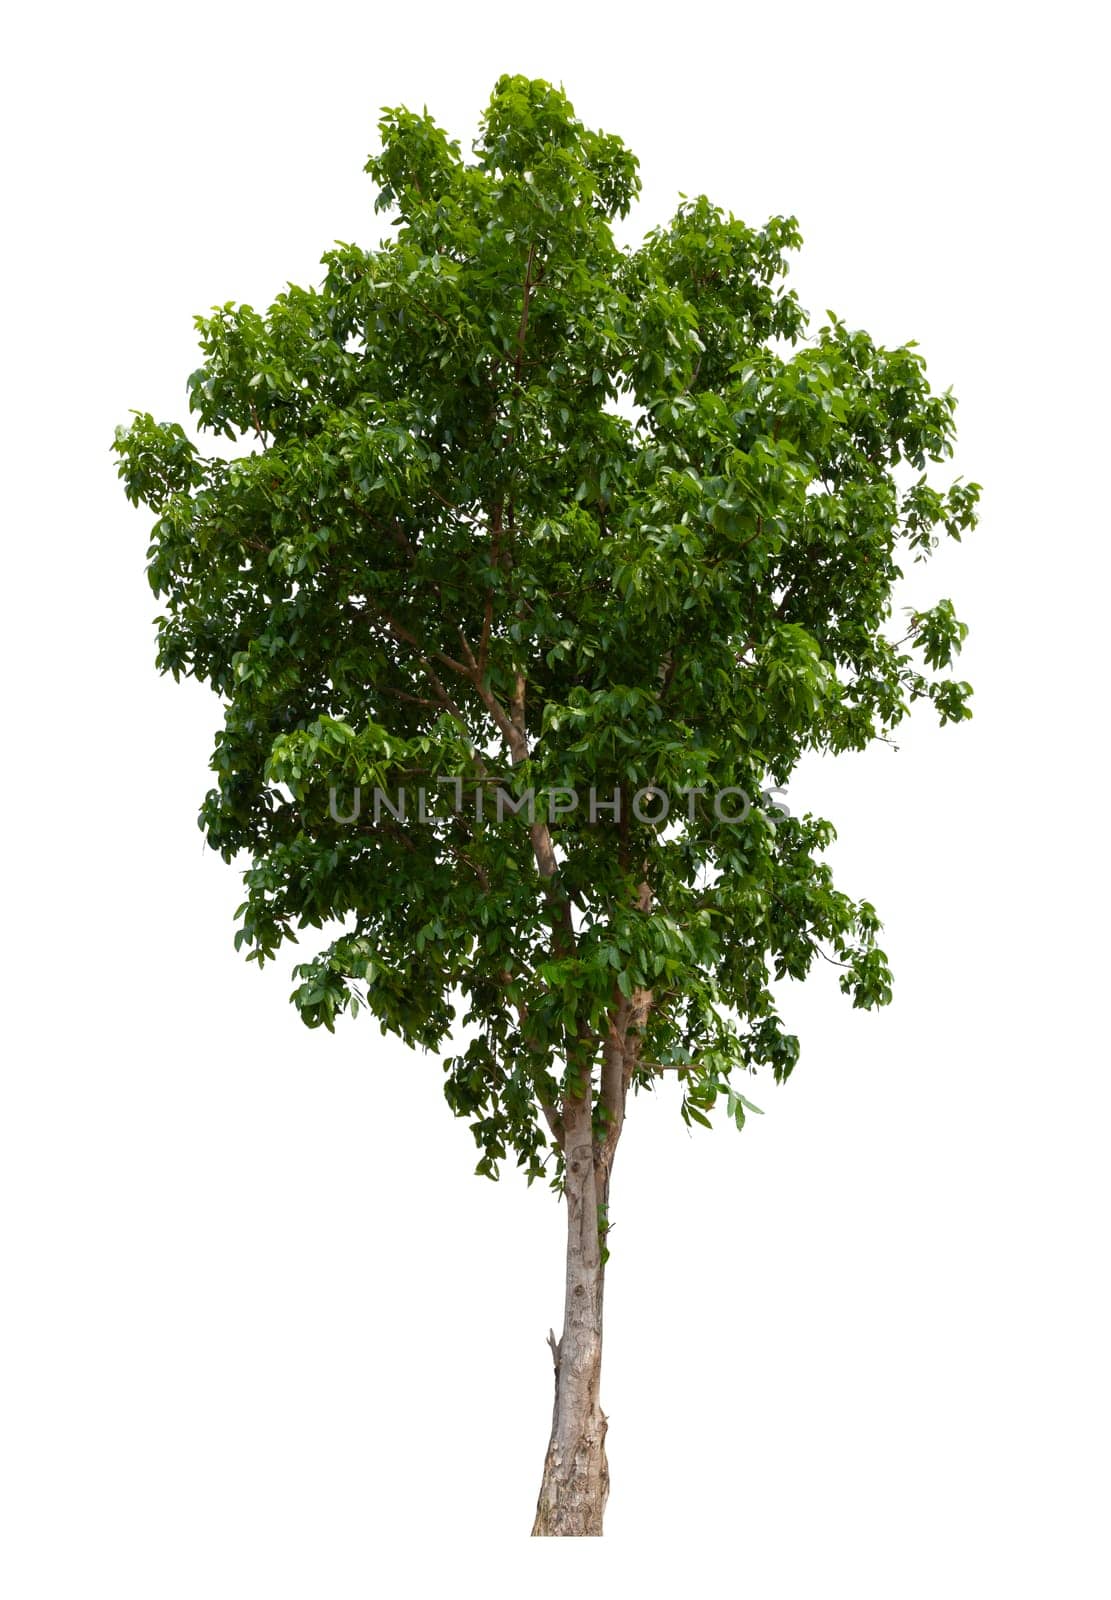 Tree isolated on white background, Save Clipping Path. Tropical tree isolated.